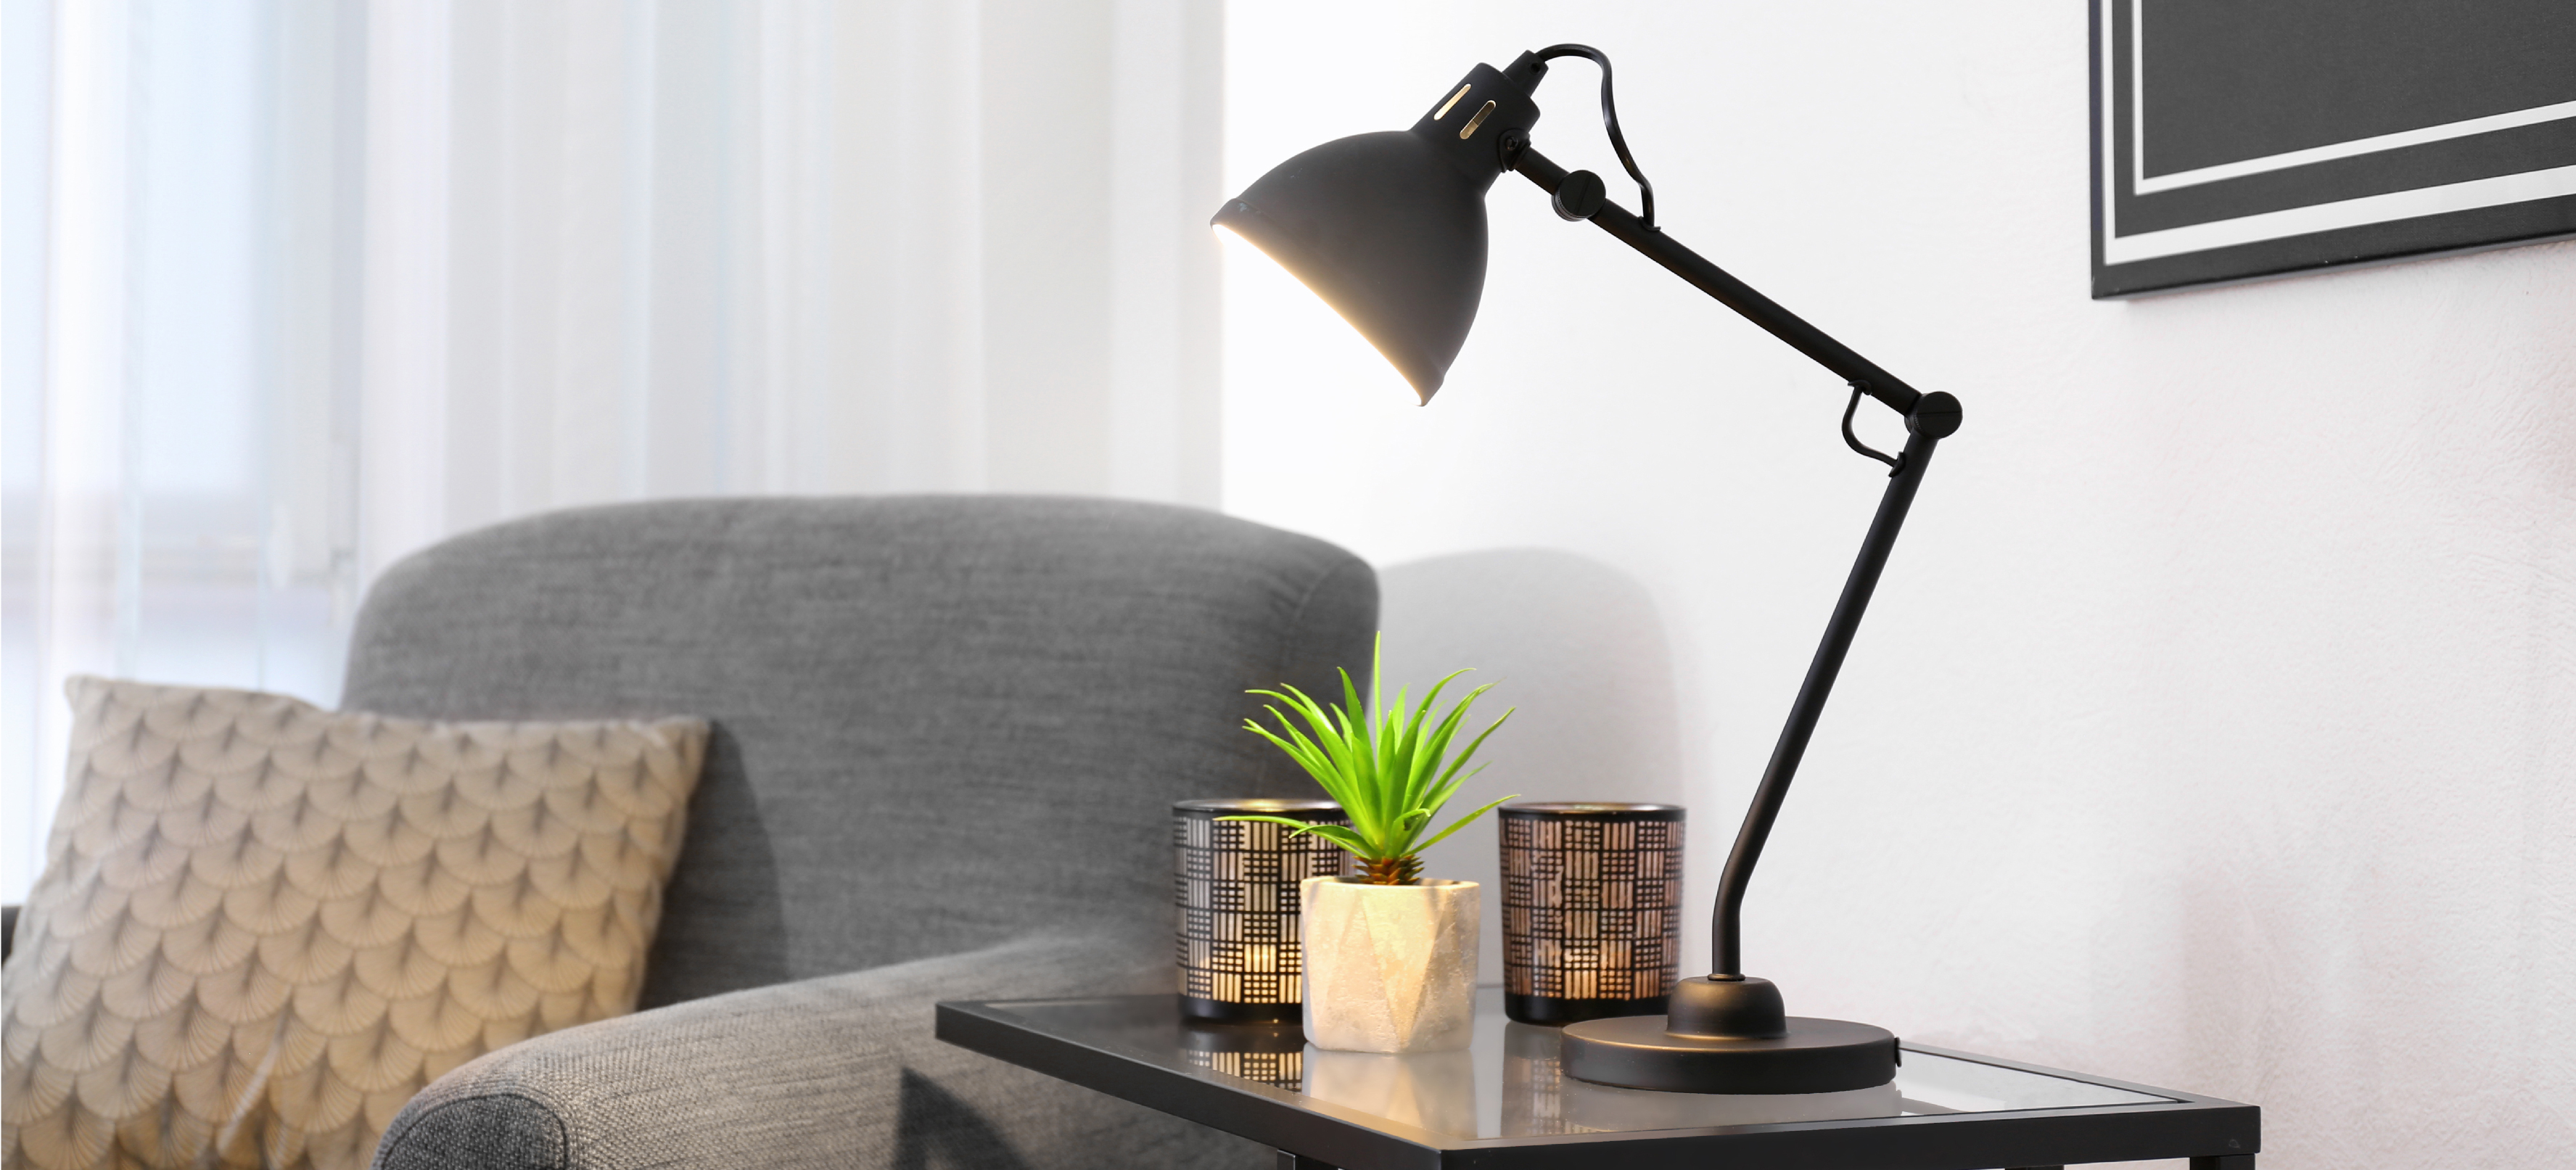 Brighten Up Your Home with These Stylish Table Lamps